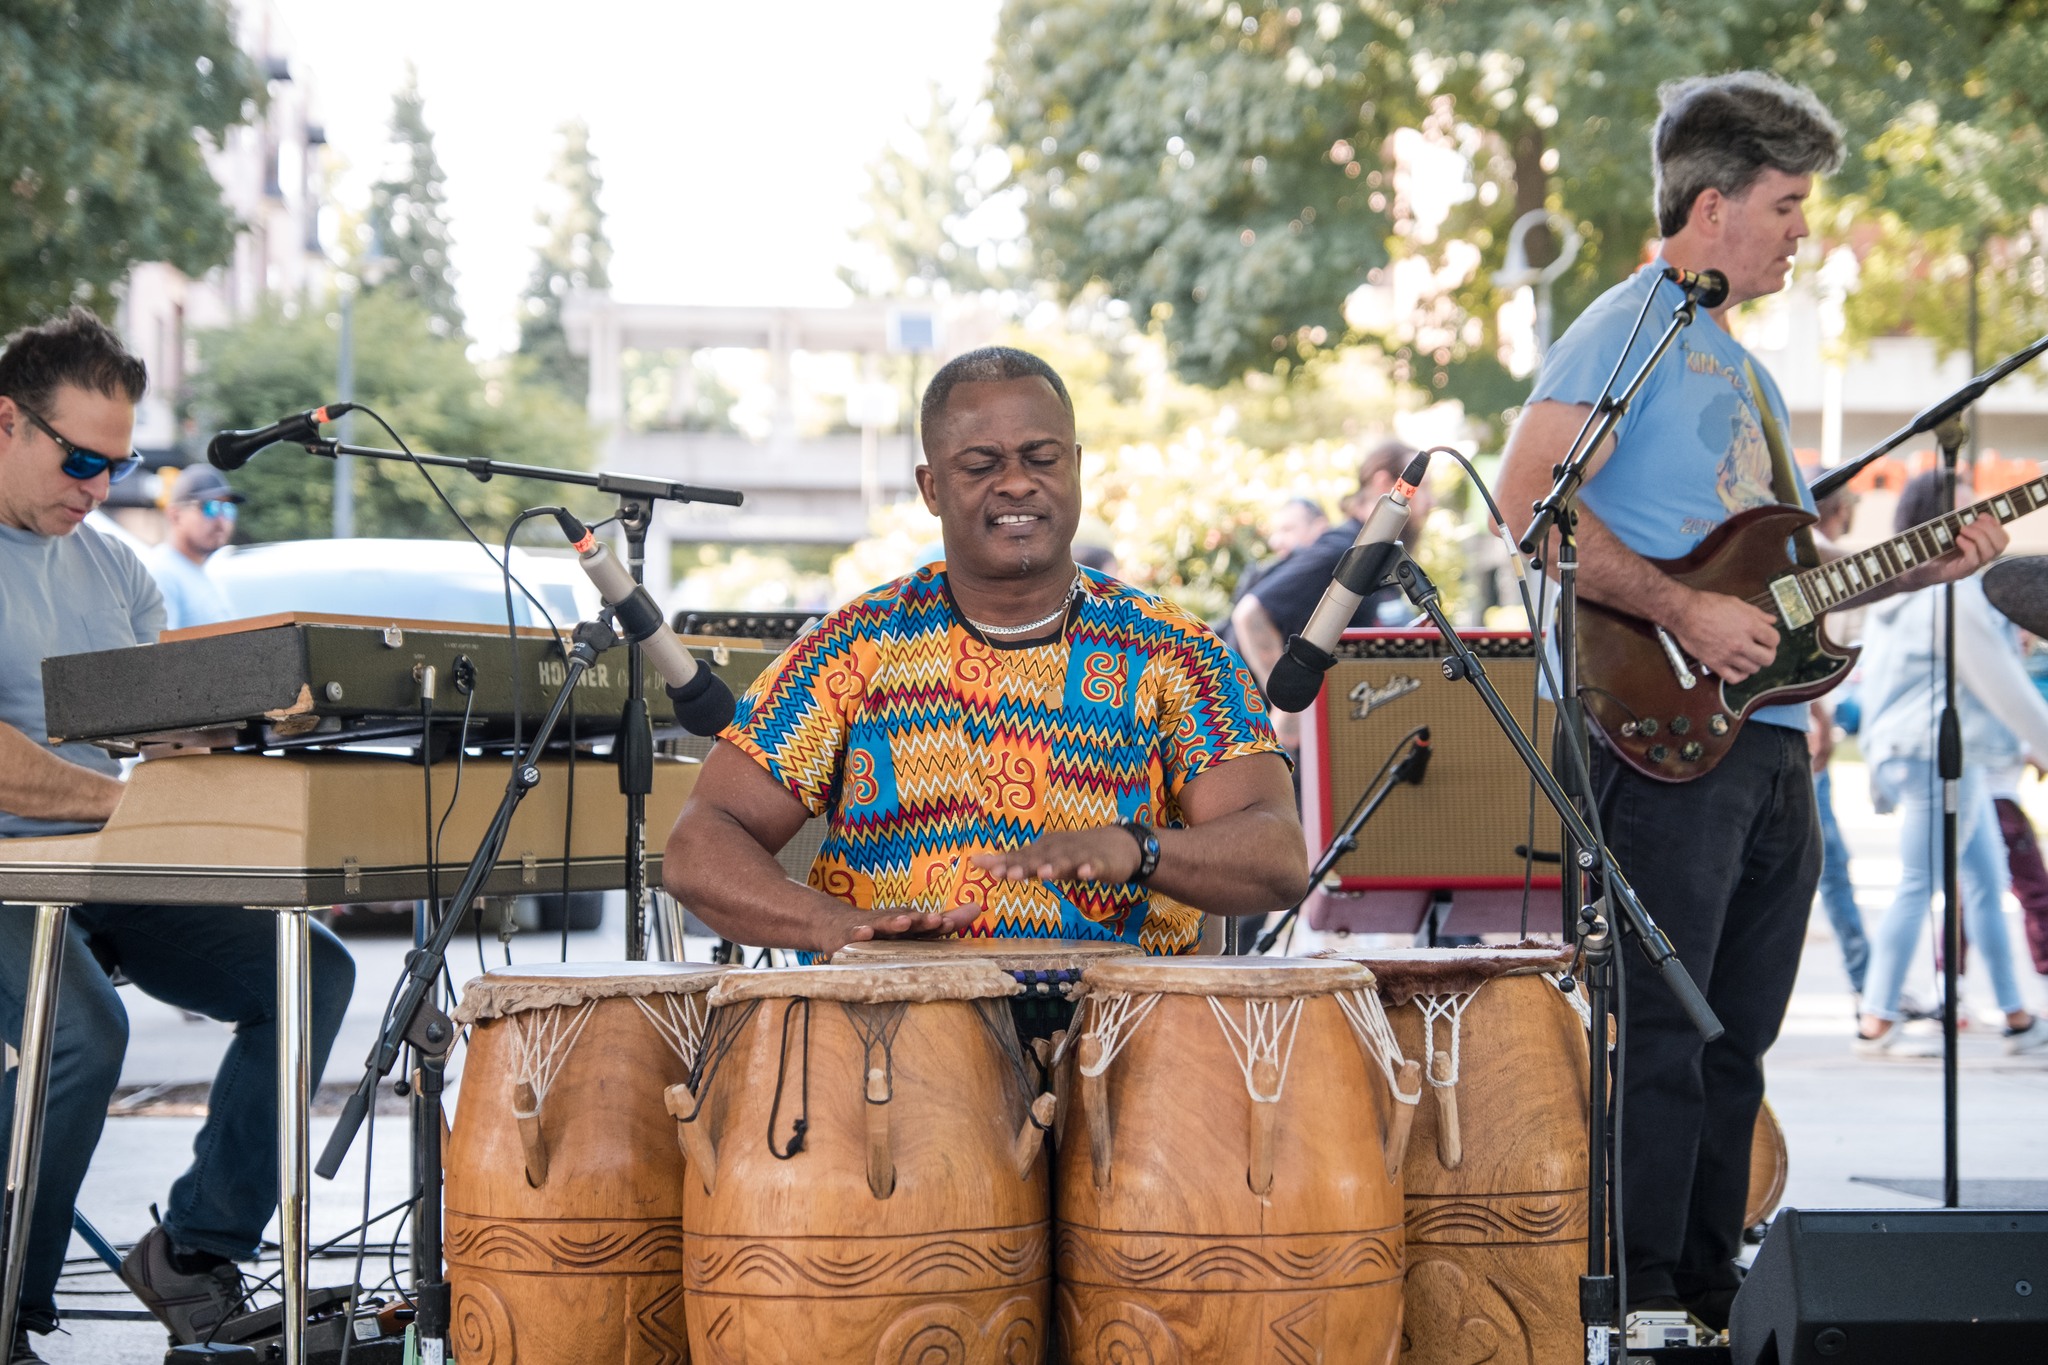 Afrobeat band Jujuba plays music on the Esther Short Park stage featuring drums, guitar and keyboard.